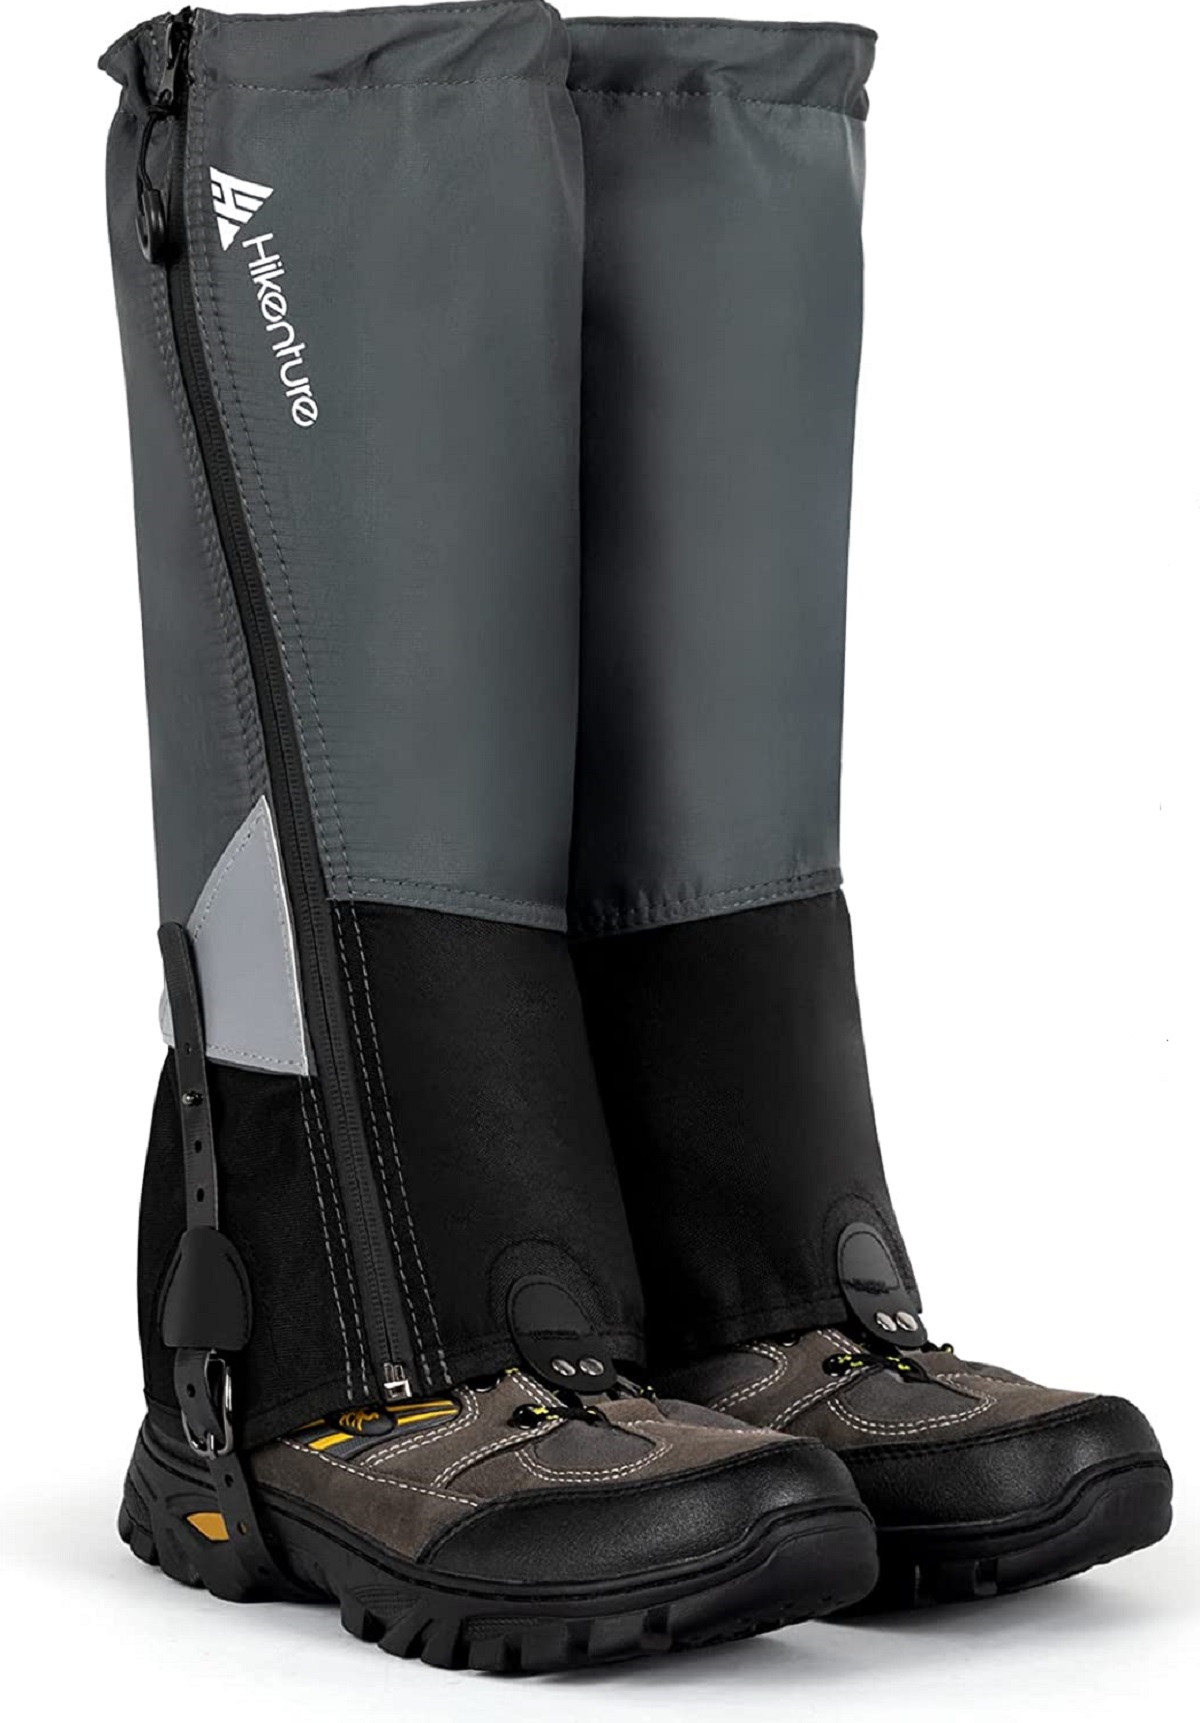 winter-style-gaiters-gray-and-black-with-zipper-closure